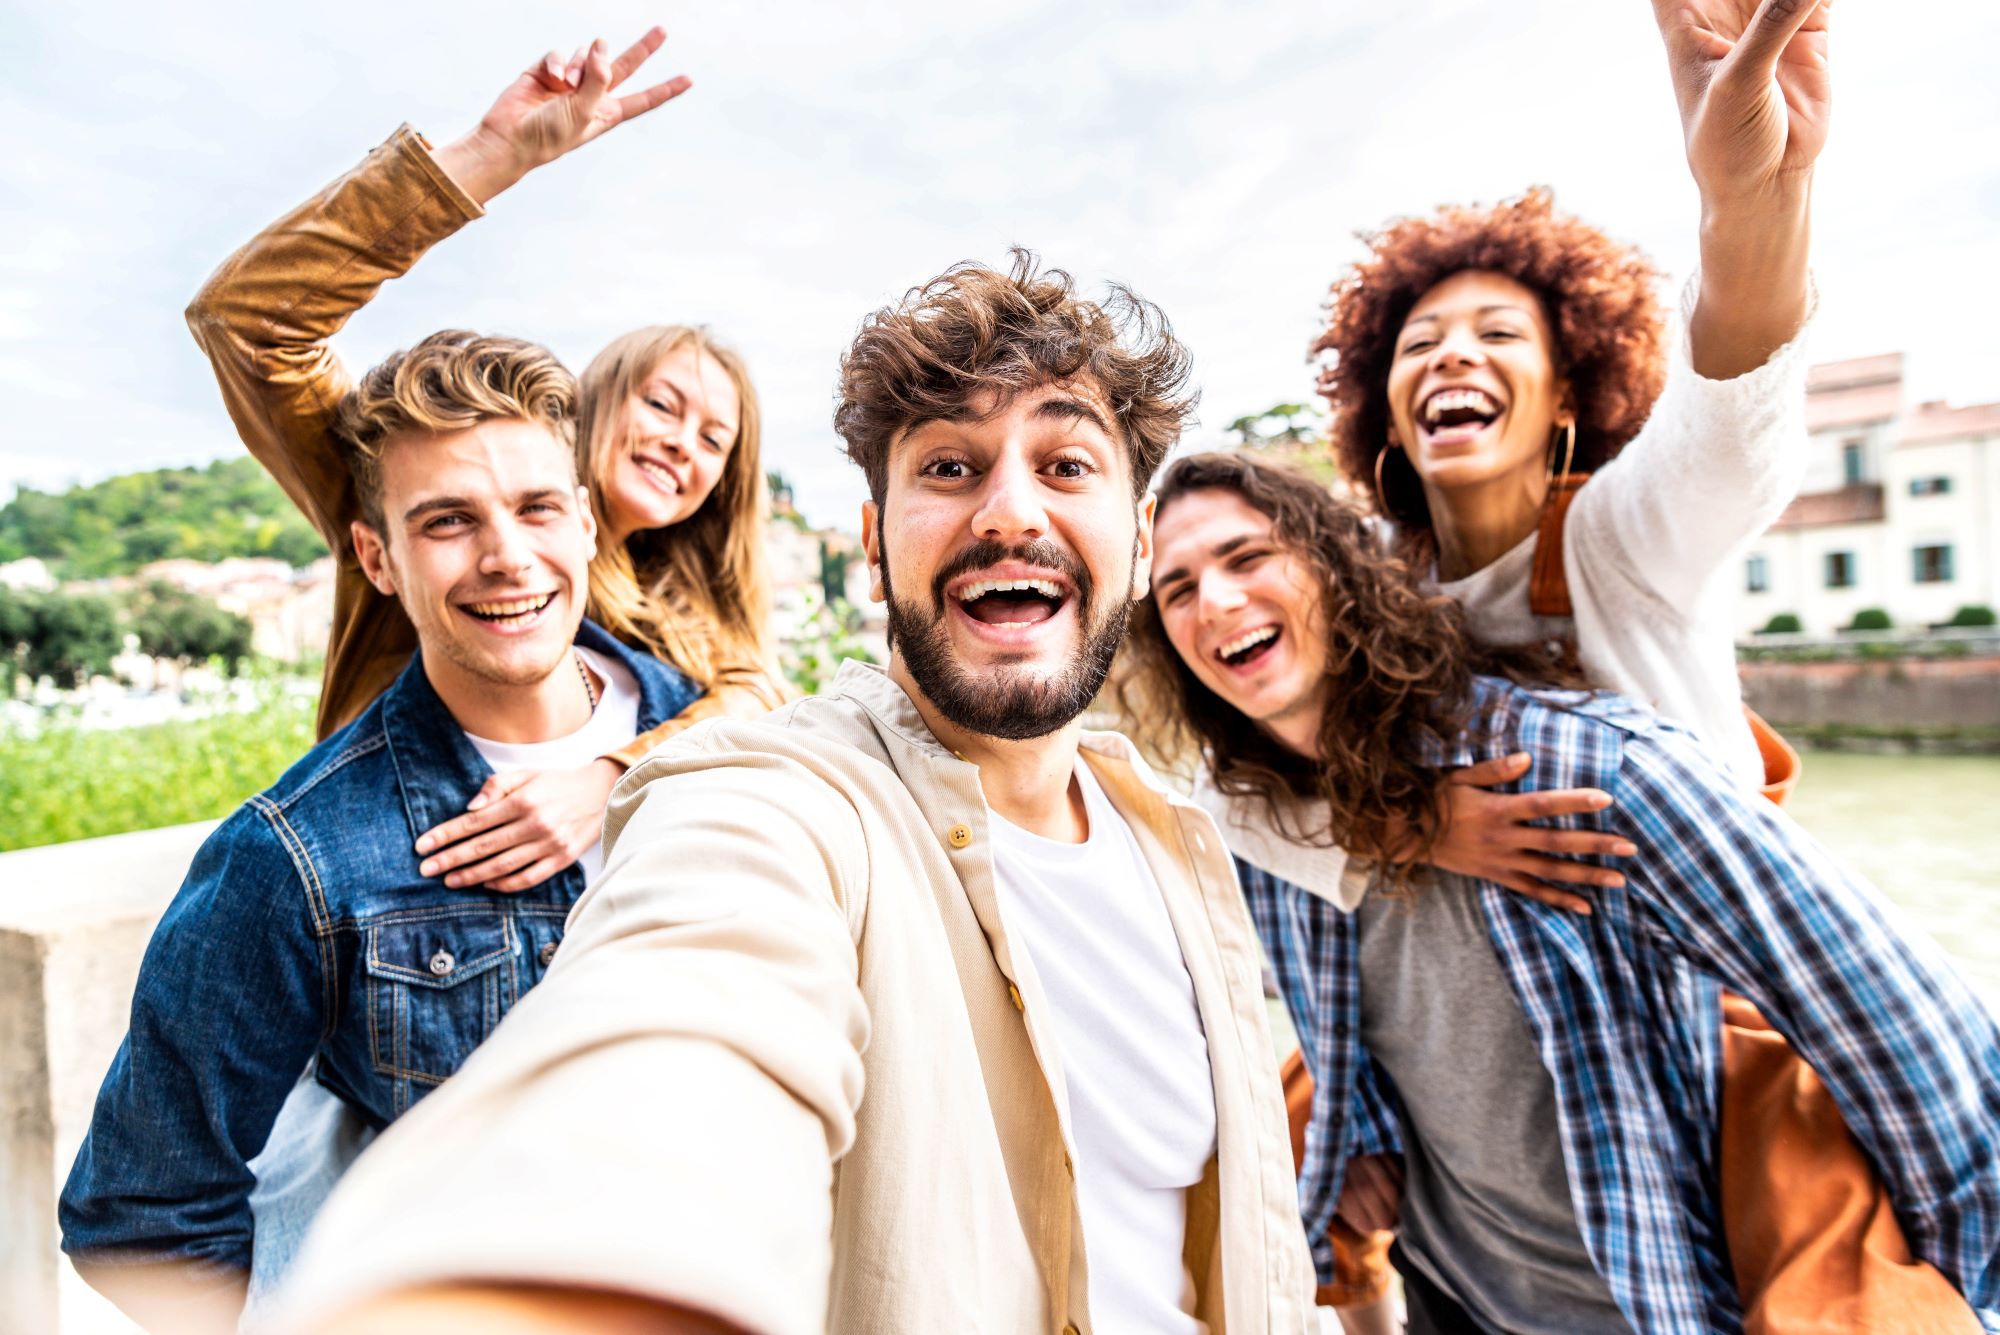 Group of friends taking a selfie outside and laughing